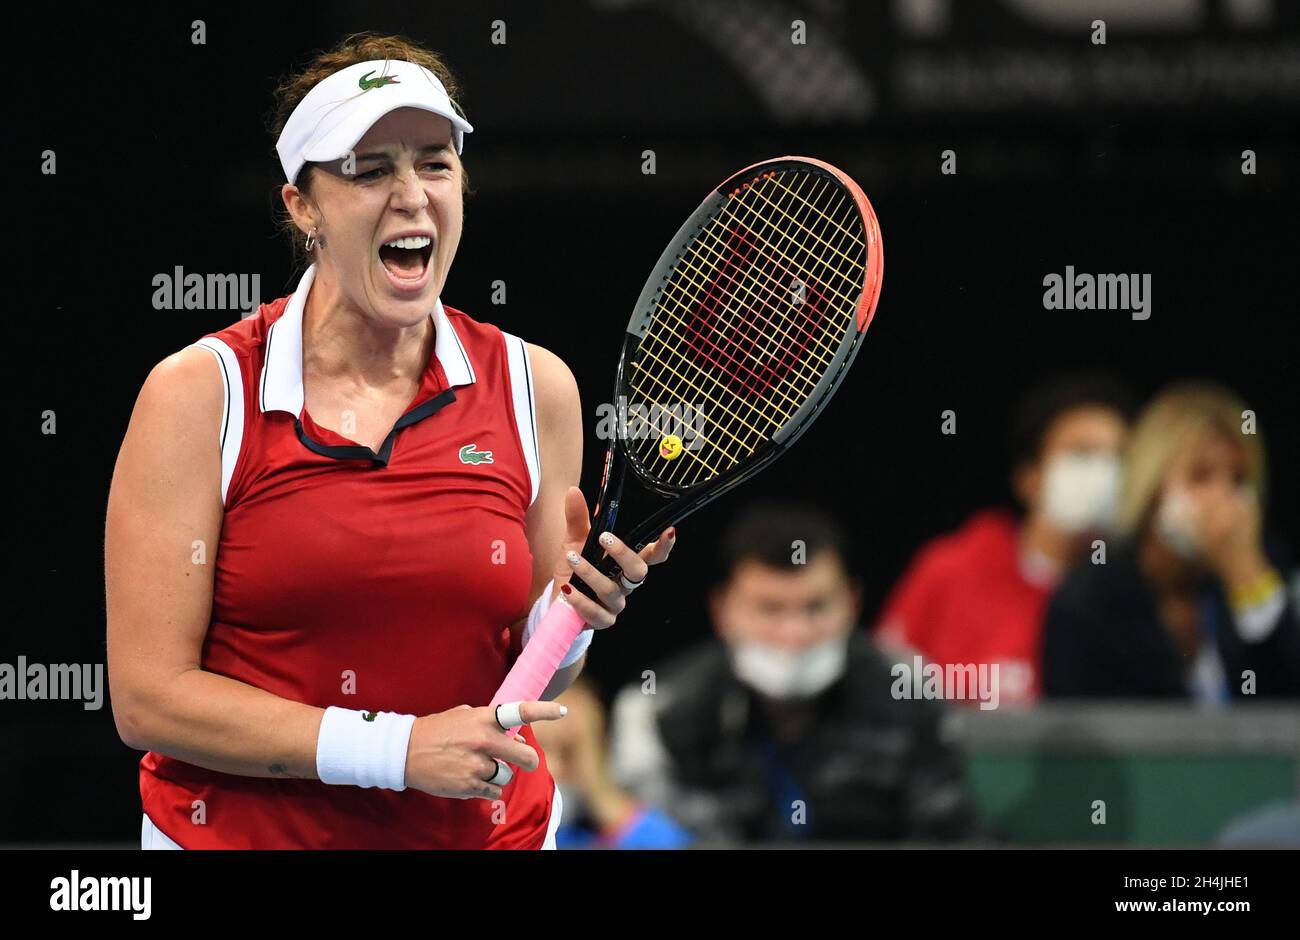 Prague, Czech Republic. 03rd Nov, 2021. Anastasia Pavlyuchenkova of Russia  reacts during Group A match of the women's tennis Billie Jean King Cup  (former Fed Cup) against Alize Cornet of France in